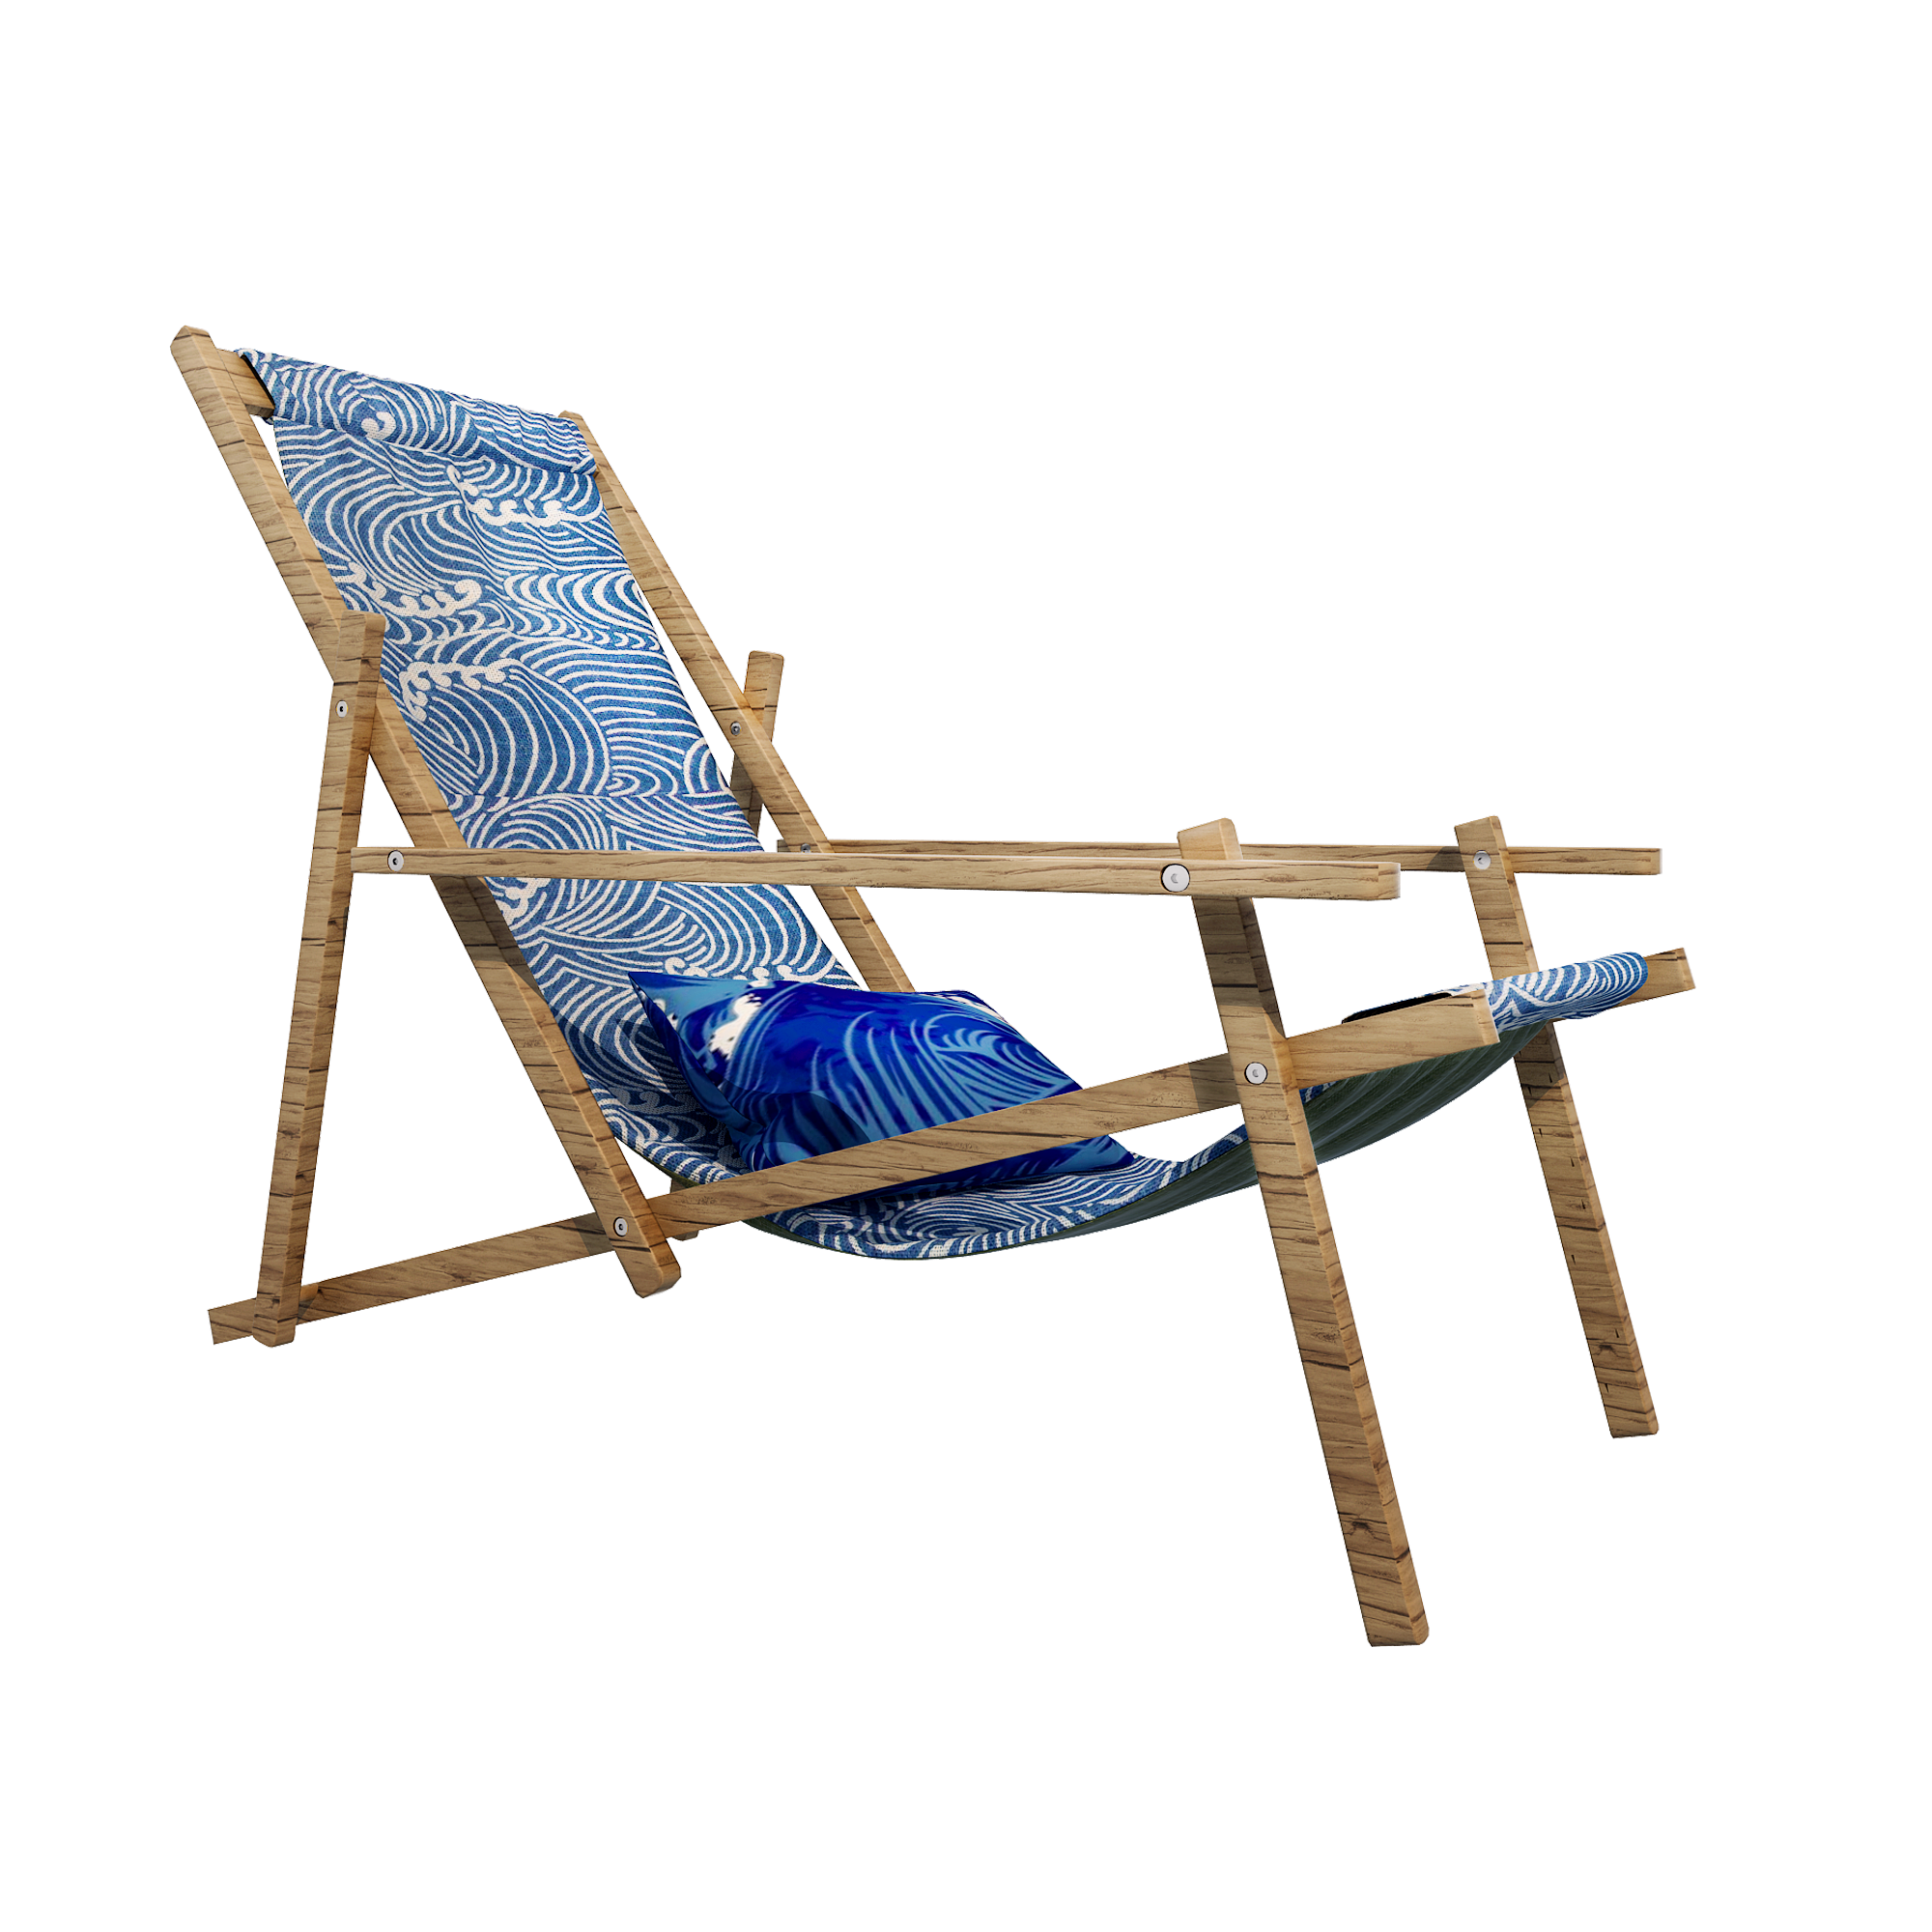 —Pngtree—exquisite beach chair png_4761895